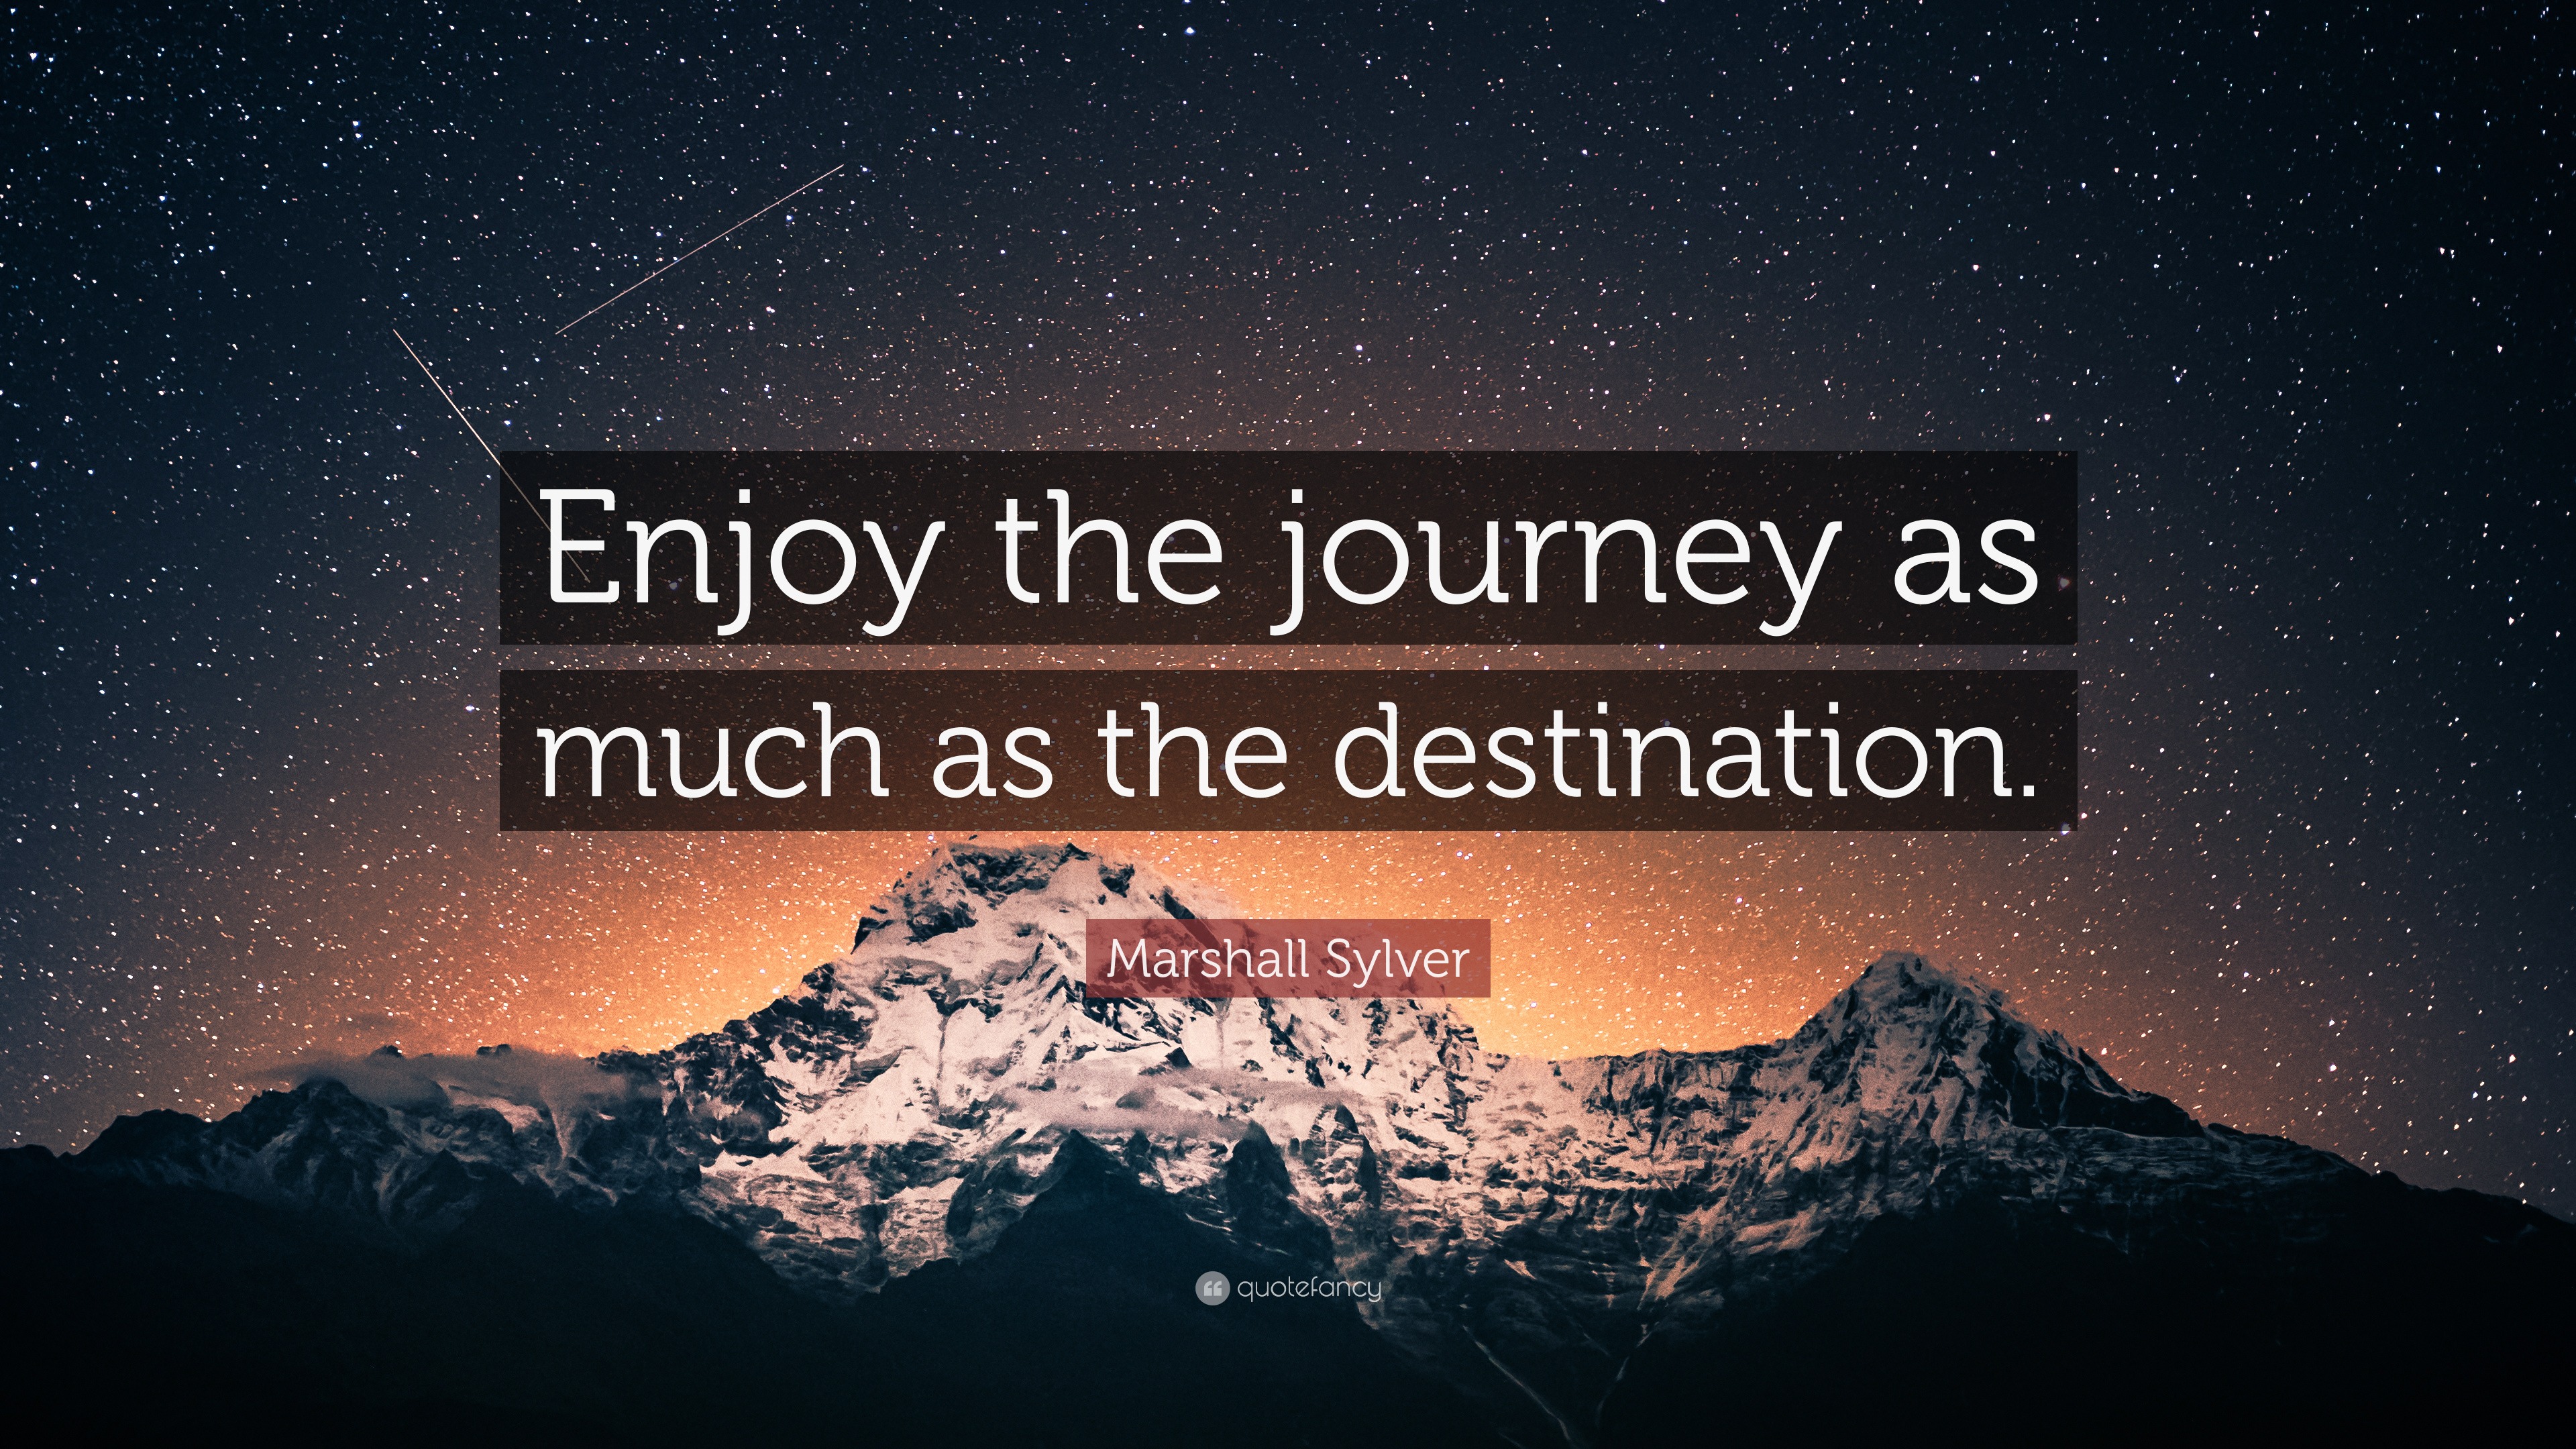 enjoy the journey as much as the destination